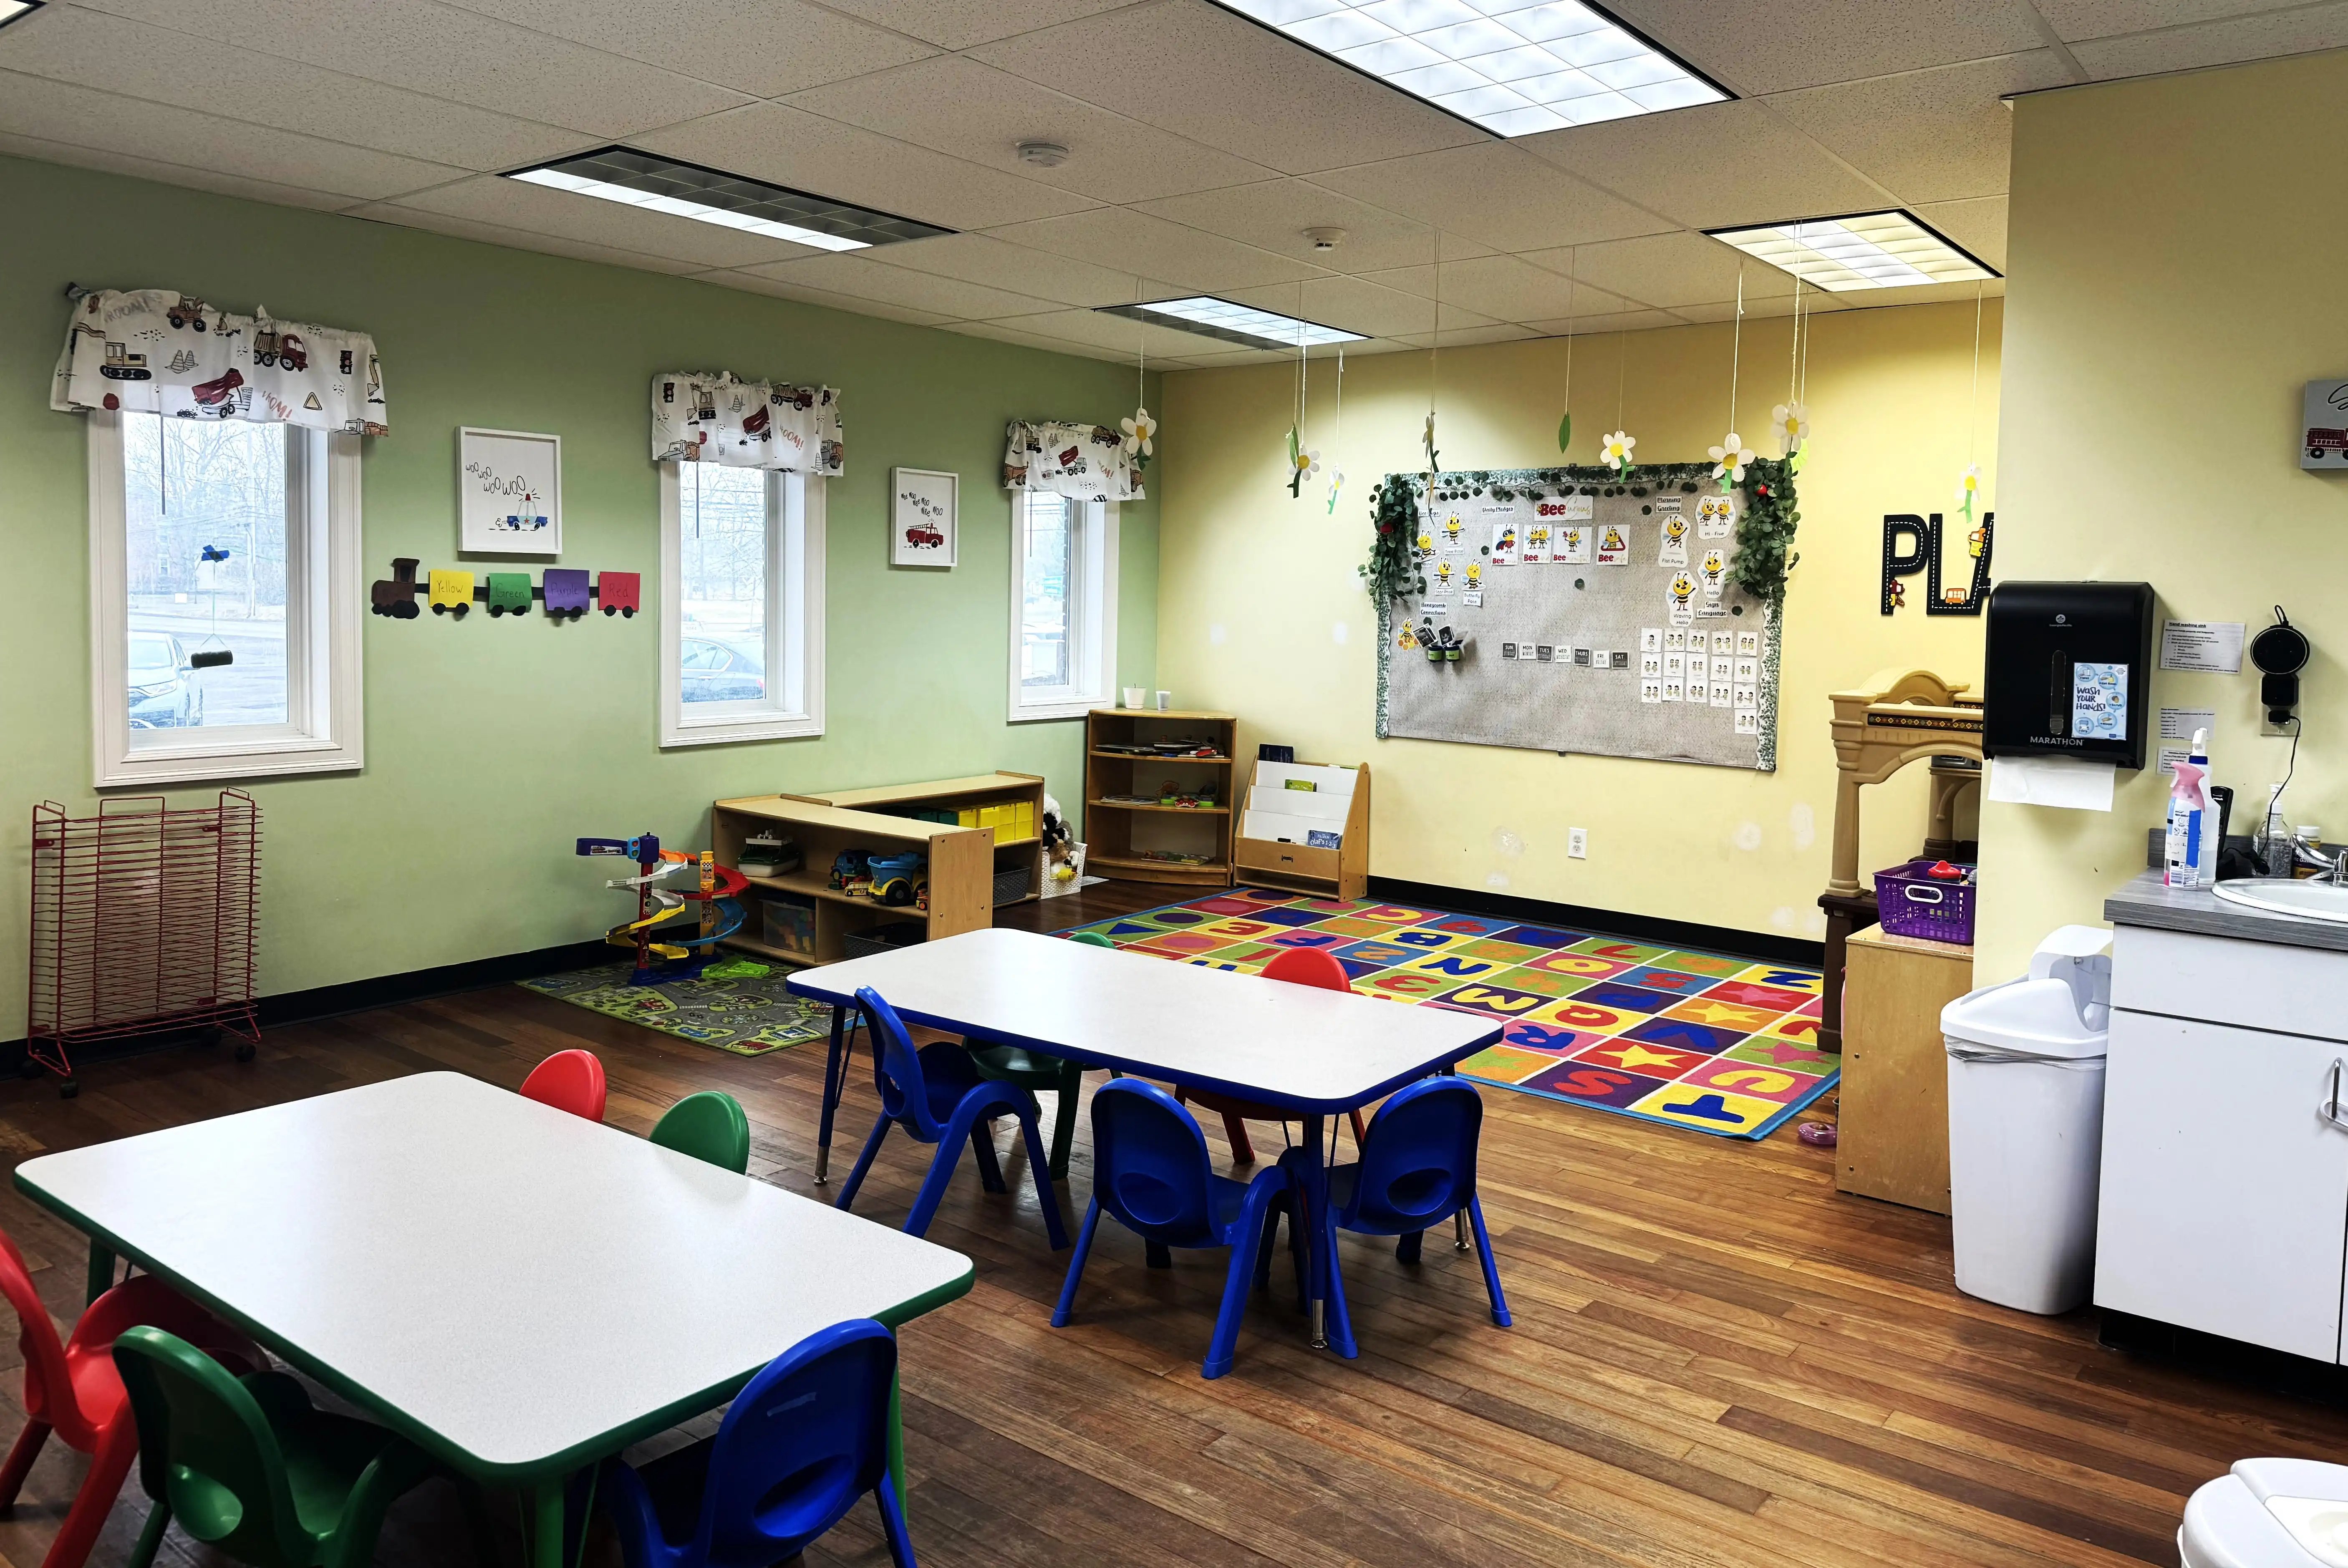 BrightPath Clarence offers exceptional daycare, preschool, and pre-k, nurturing children from six weeks to school age.